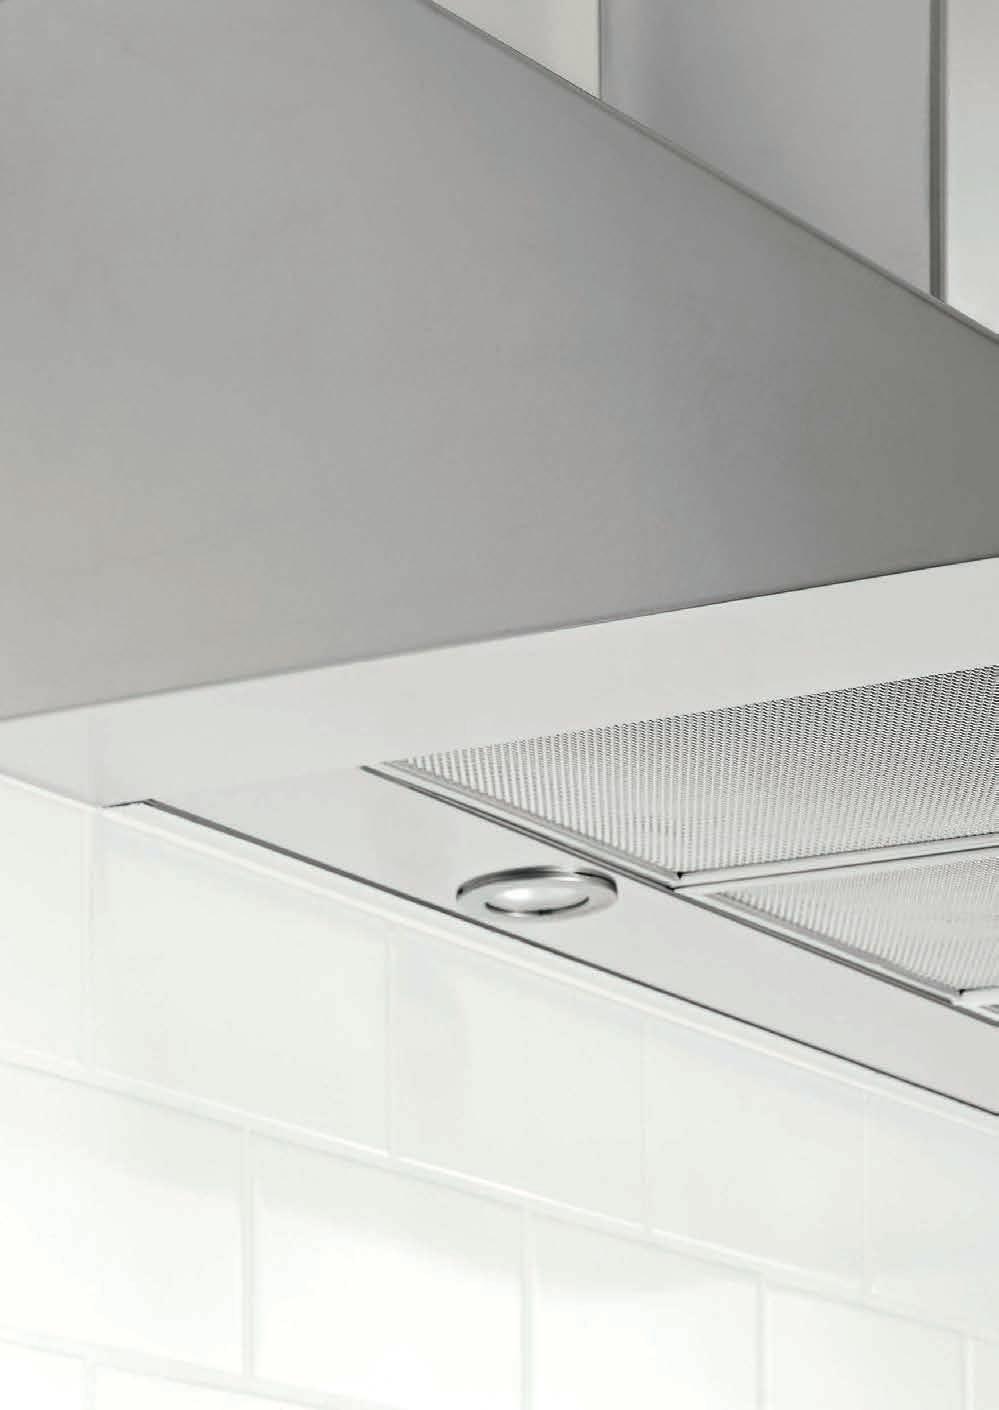 24 Cooker hoods Bertazzoni cooker hoods offer a wide range of power choices and installation methods.